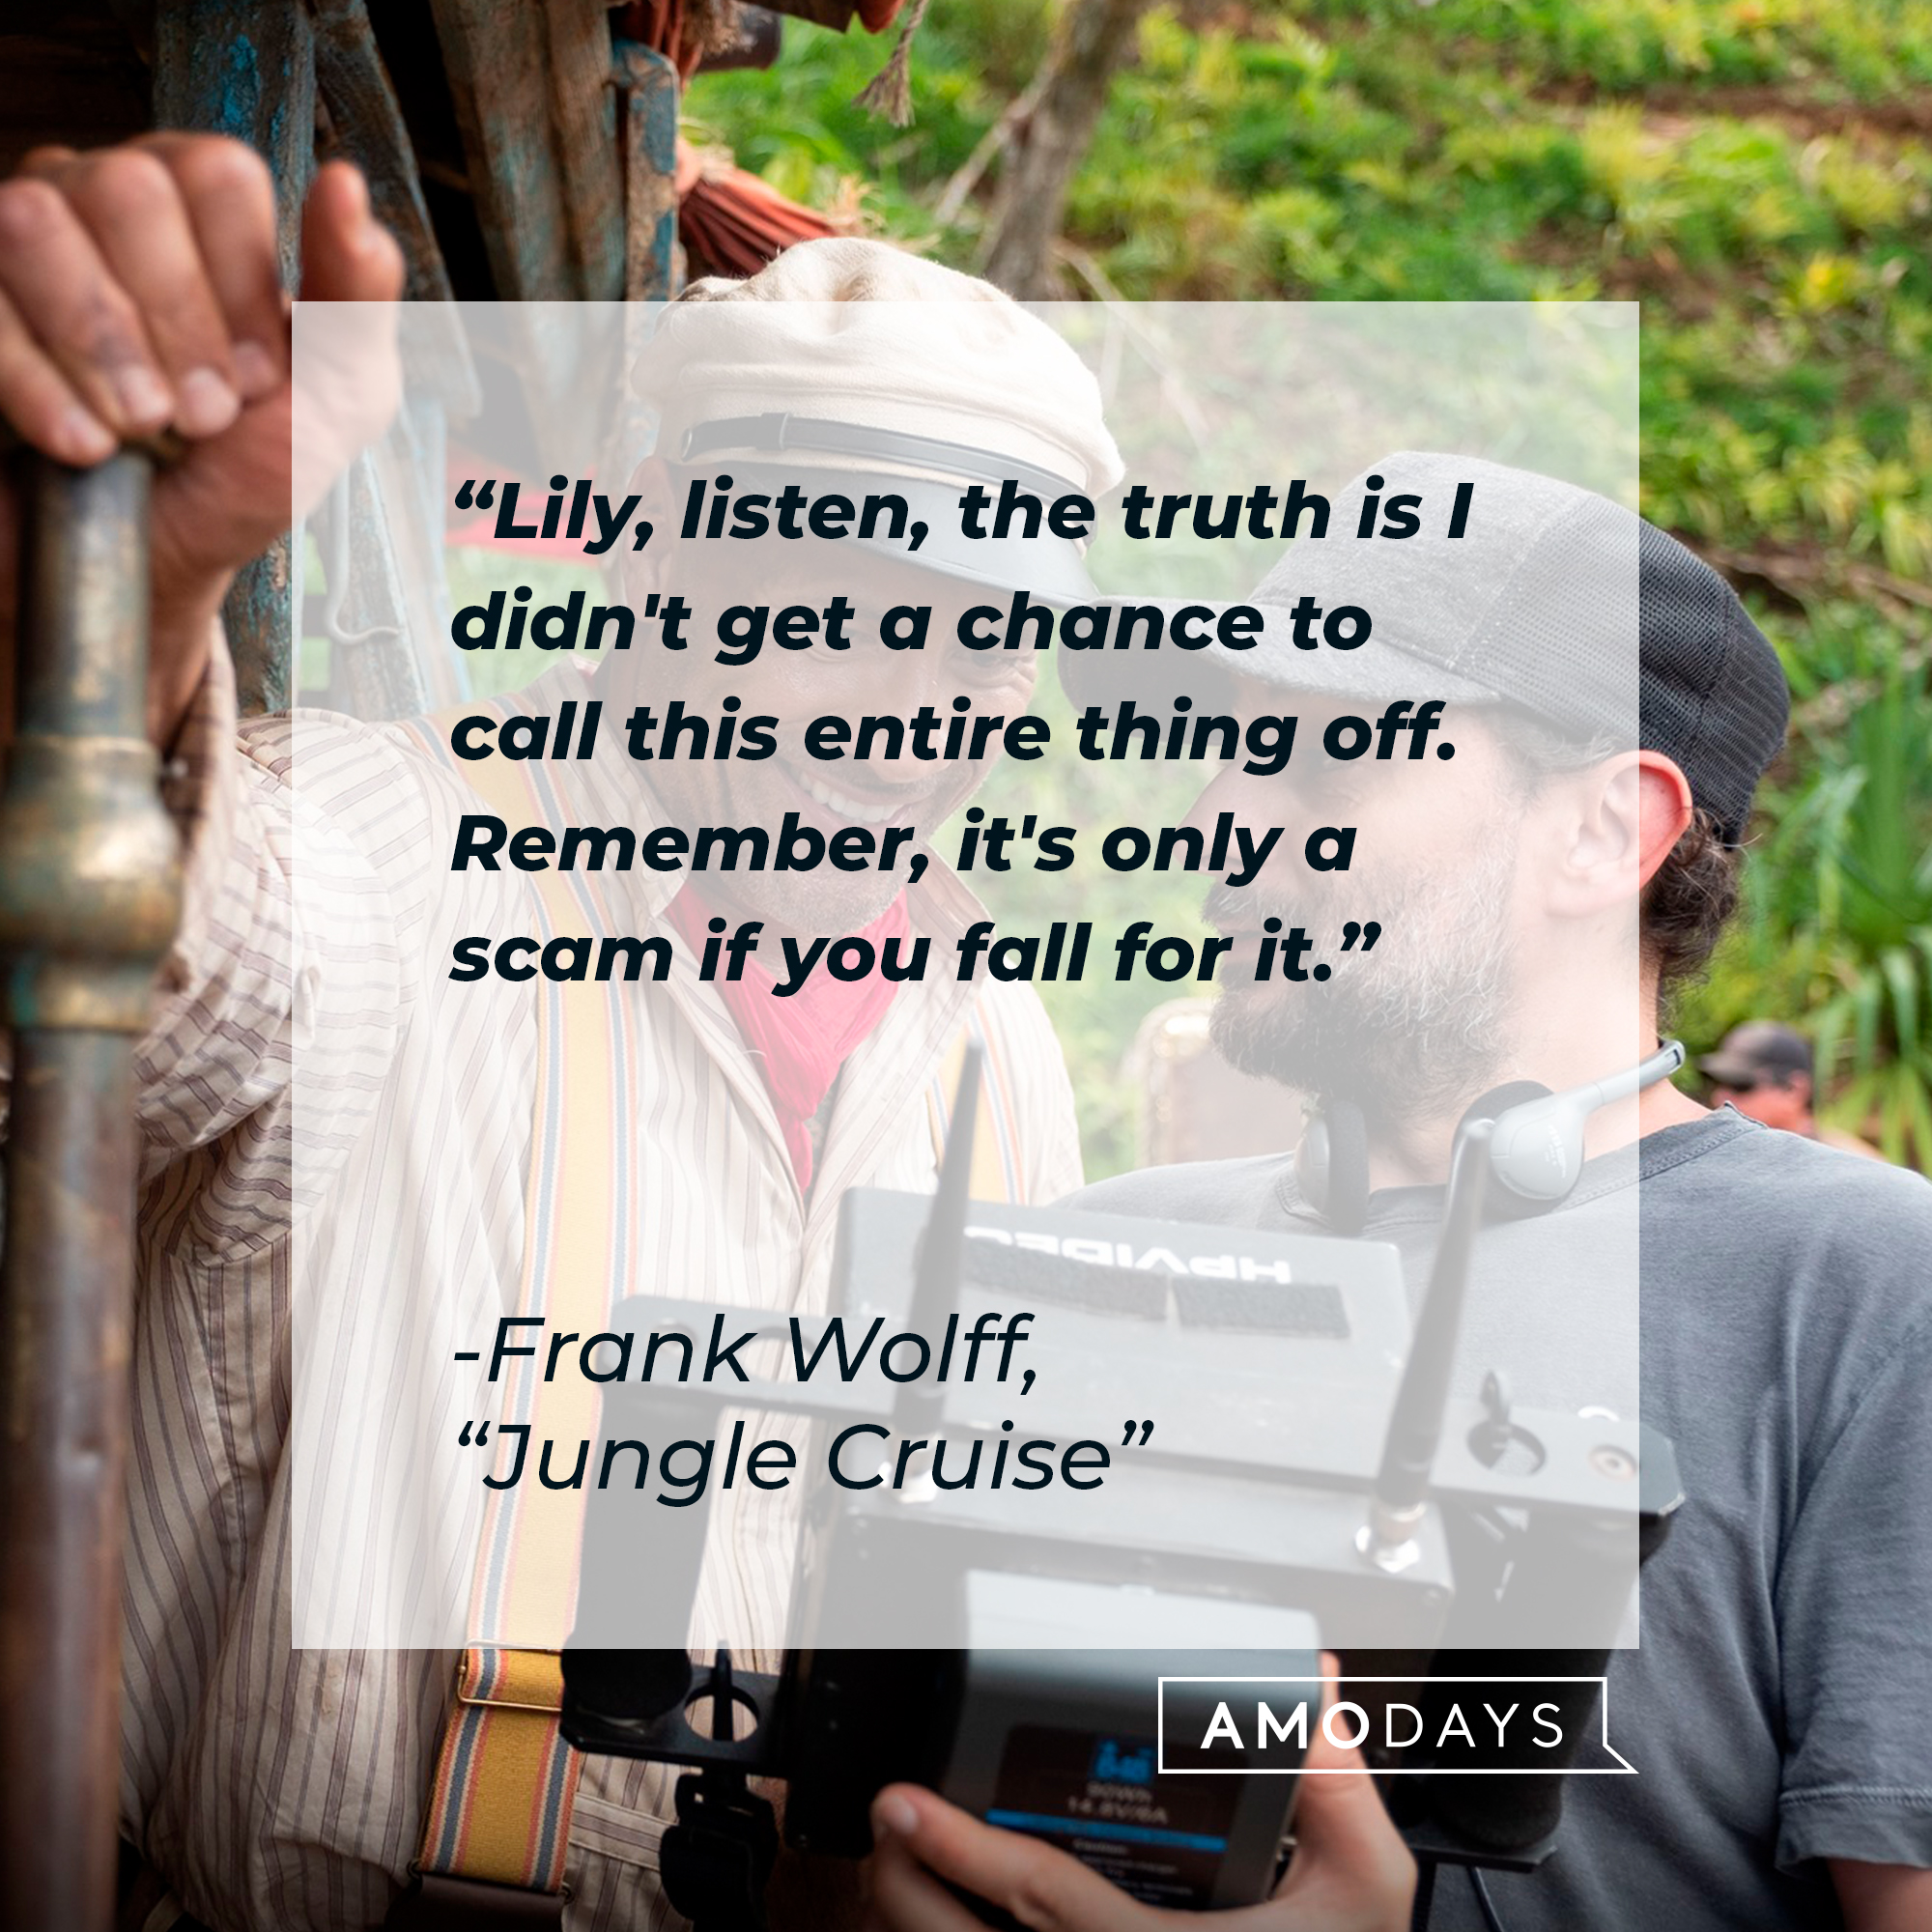 Frank Wolff’s quote: "Lily, listen, the truth is I didn't get a chance to call this entire thing off. Remember, it's only a scam if you fall for it." | Image: facebook.com/JungleCruise